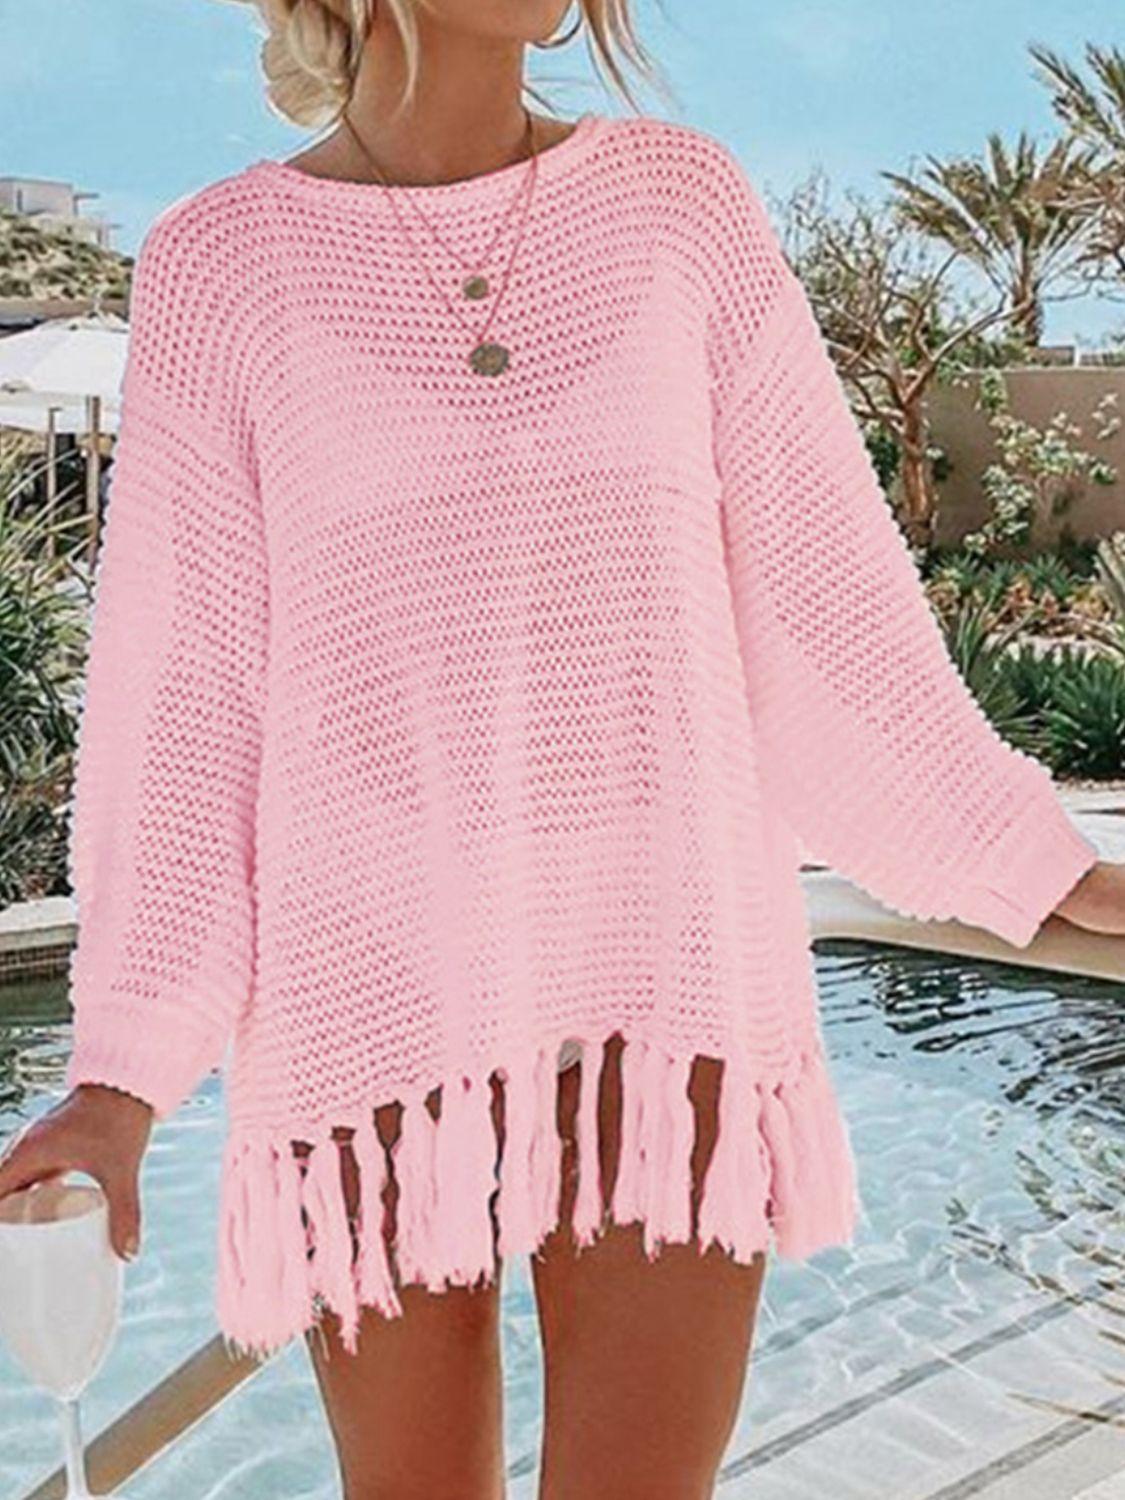 a woman standing next to a pool wearing a pink sweater